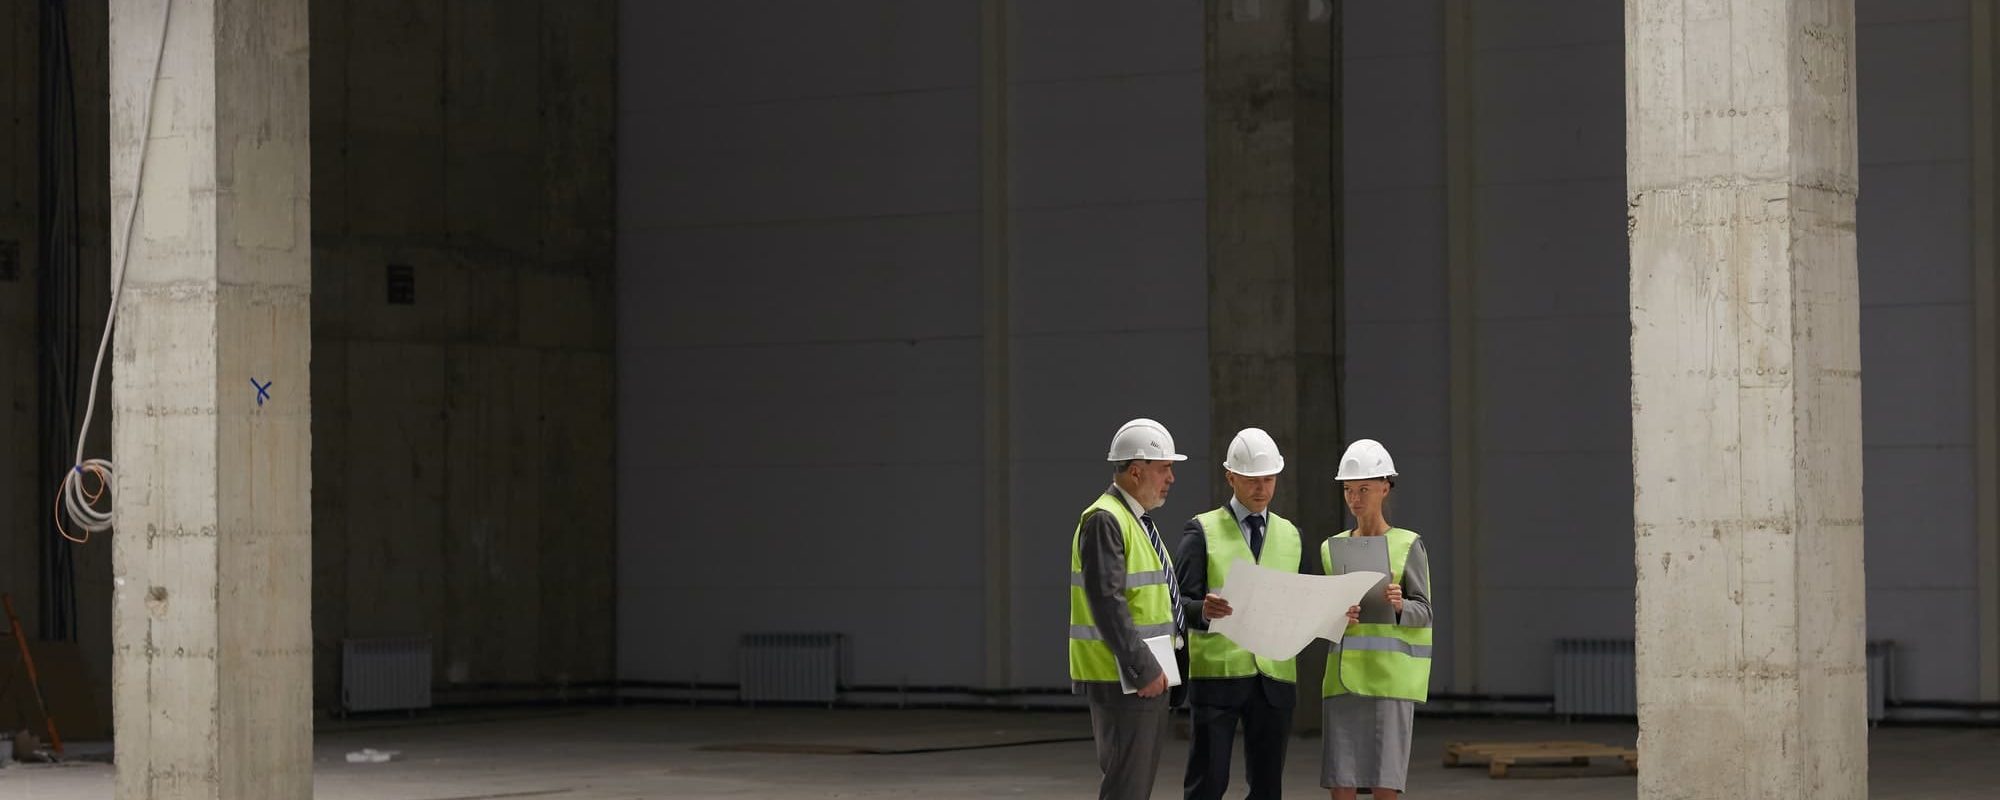 Inspection Committee at Construction Site